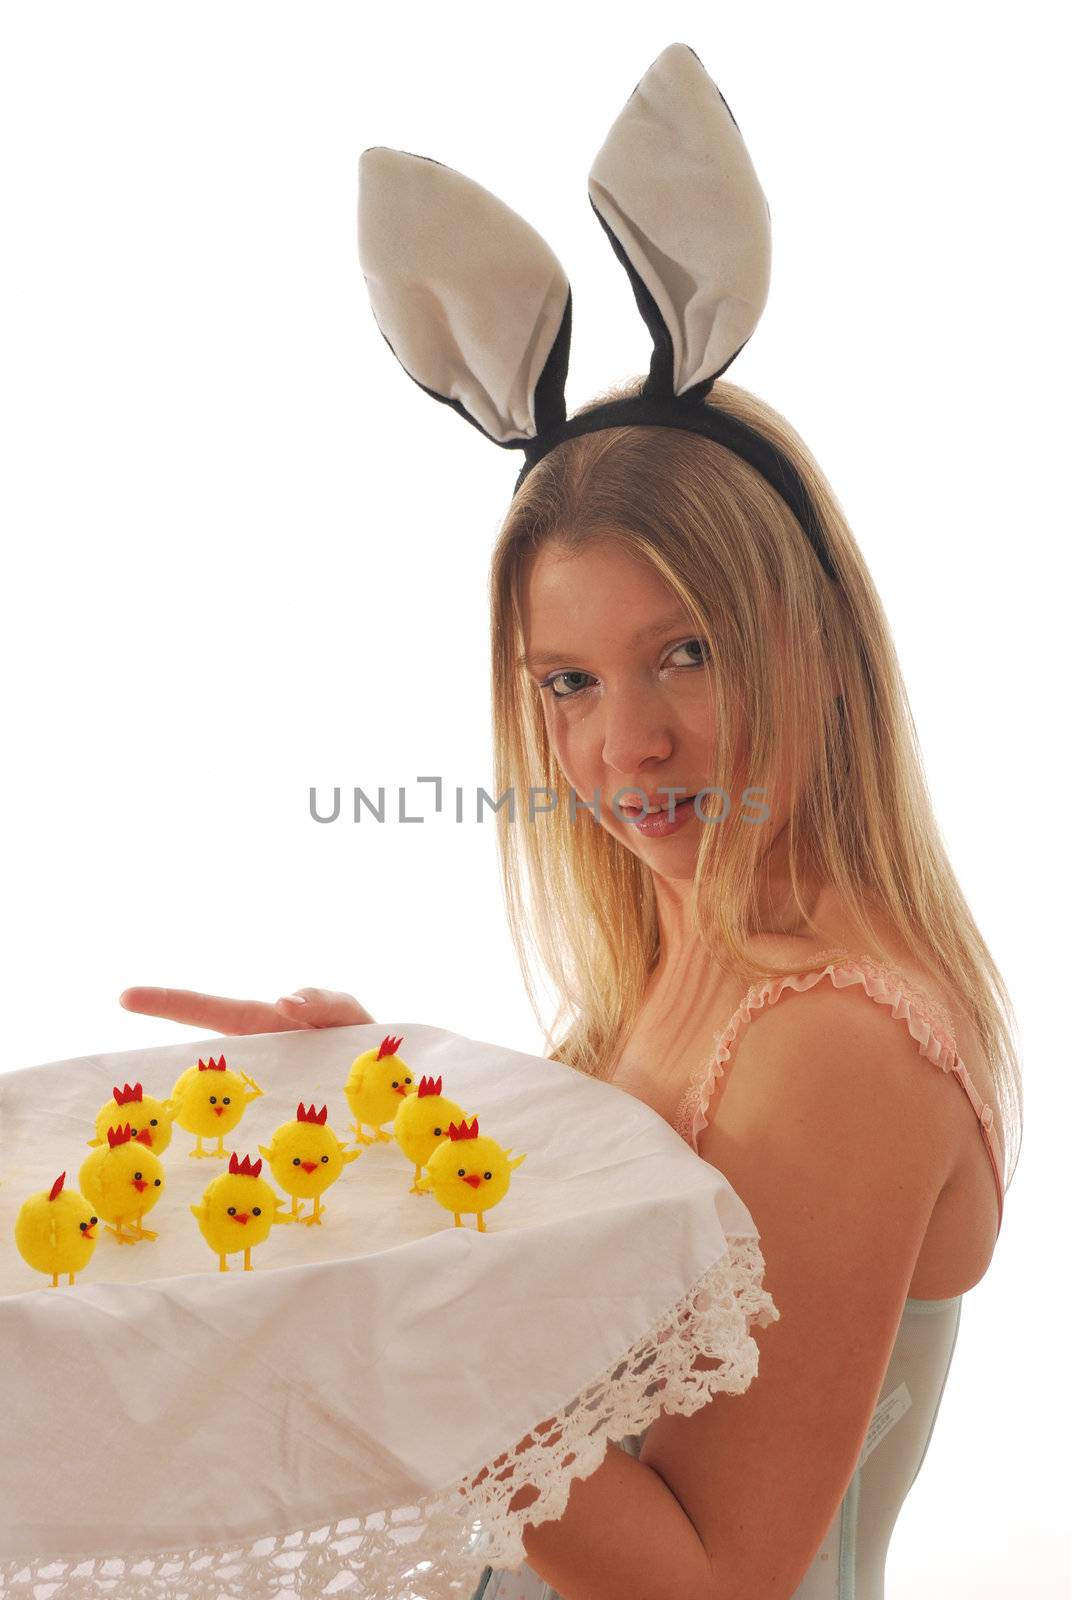 Bunny girl with tray of chicks by pauws99